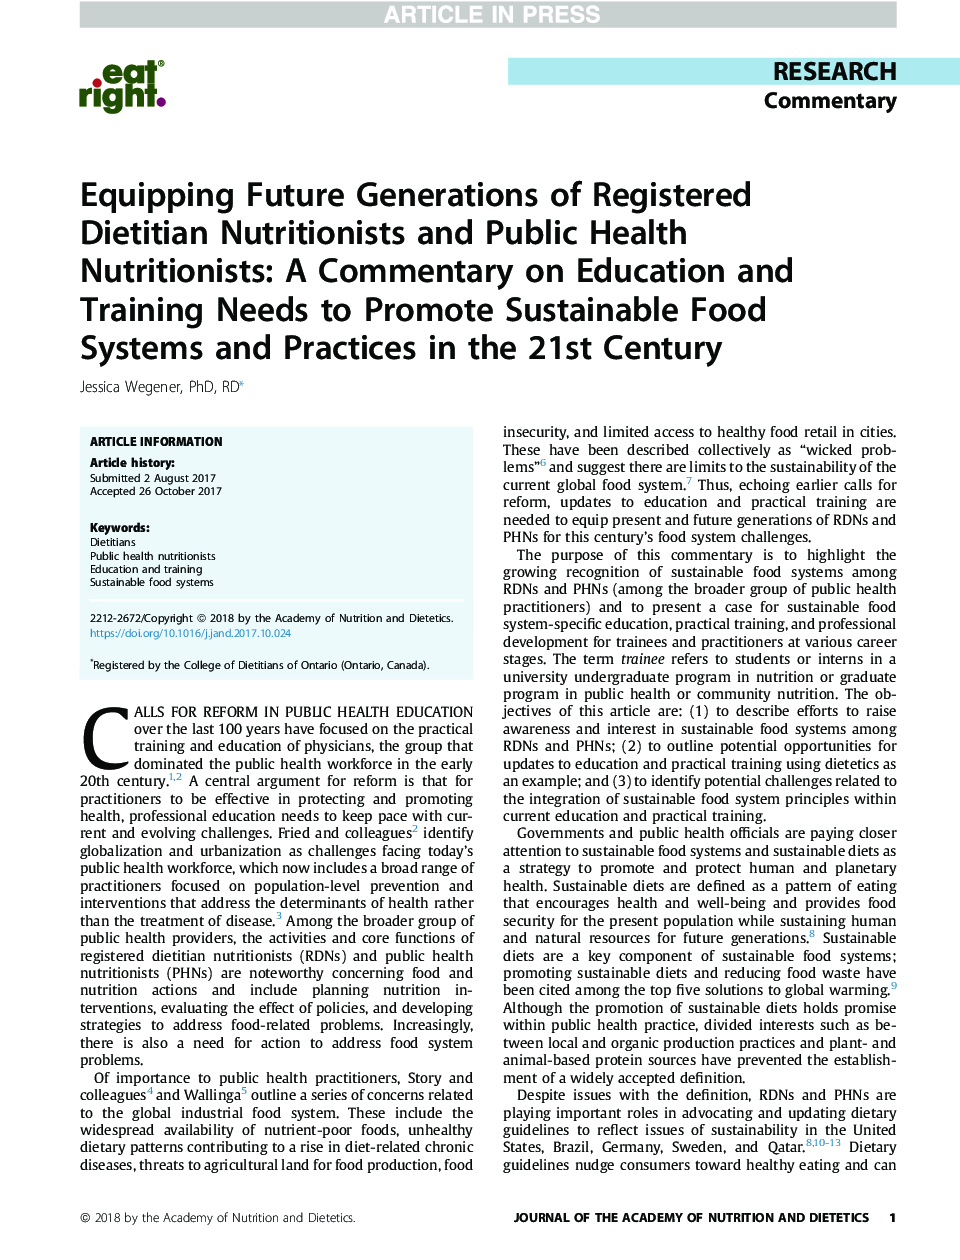 Equipping Future Generations of Registered Dietitian Nutritionists and Public Health Nutritionists: A Commentary on Education and Training Needs to Promote Sustainable Food Systems and Practices in the 21st Century